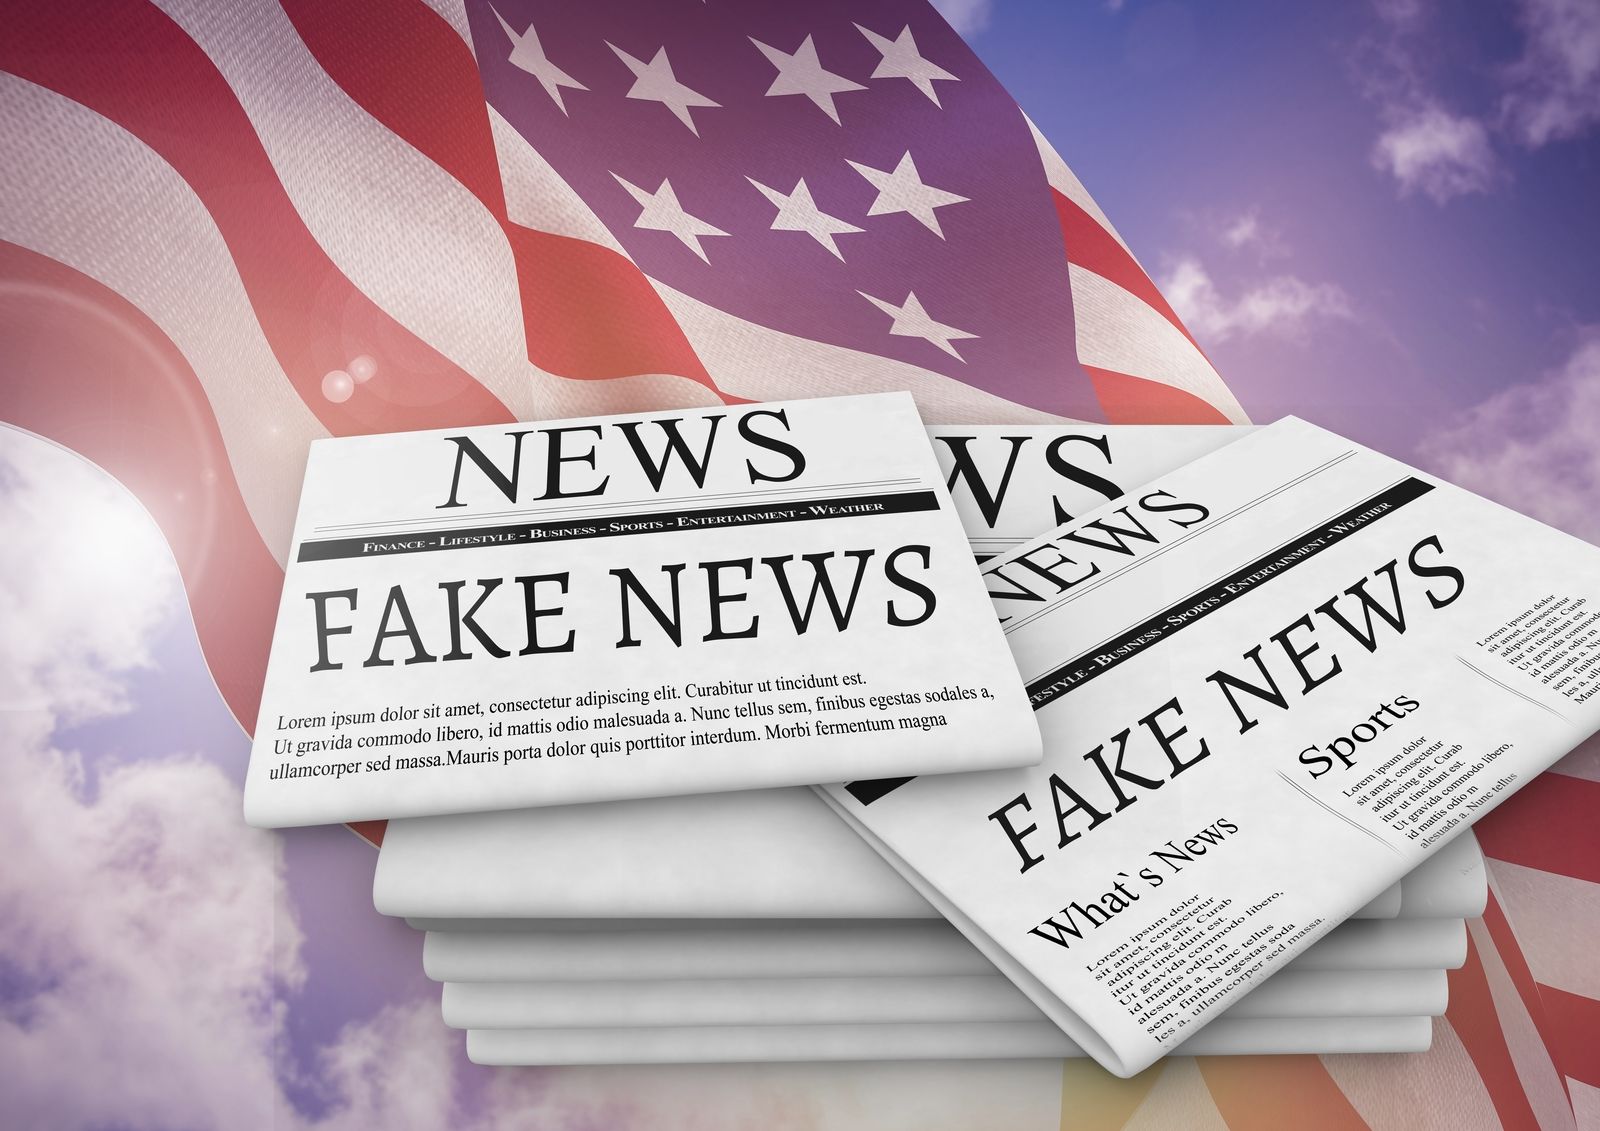 https://media.publit.io/file/w_1600,h_1131,c_fit,q_80/29646484-fake-news-newspapers-stacked-up-with-usa-flag.jpg